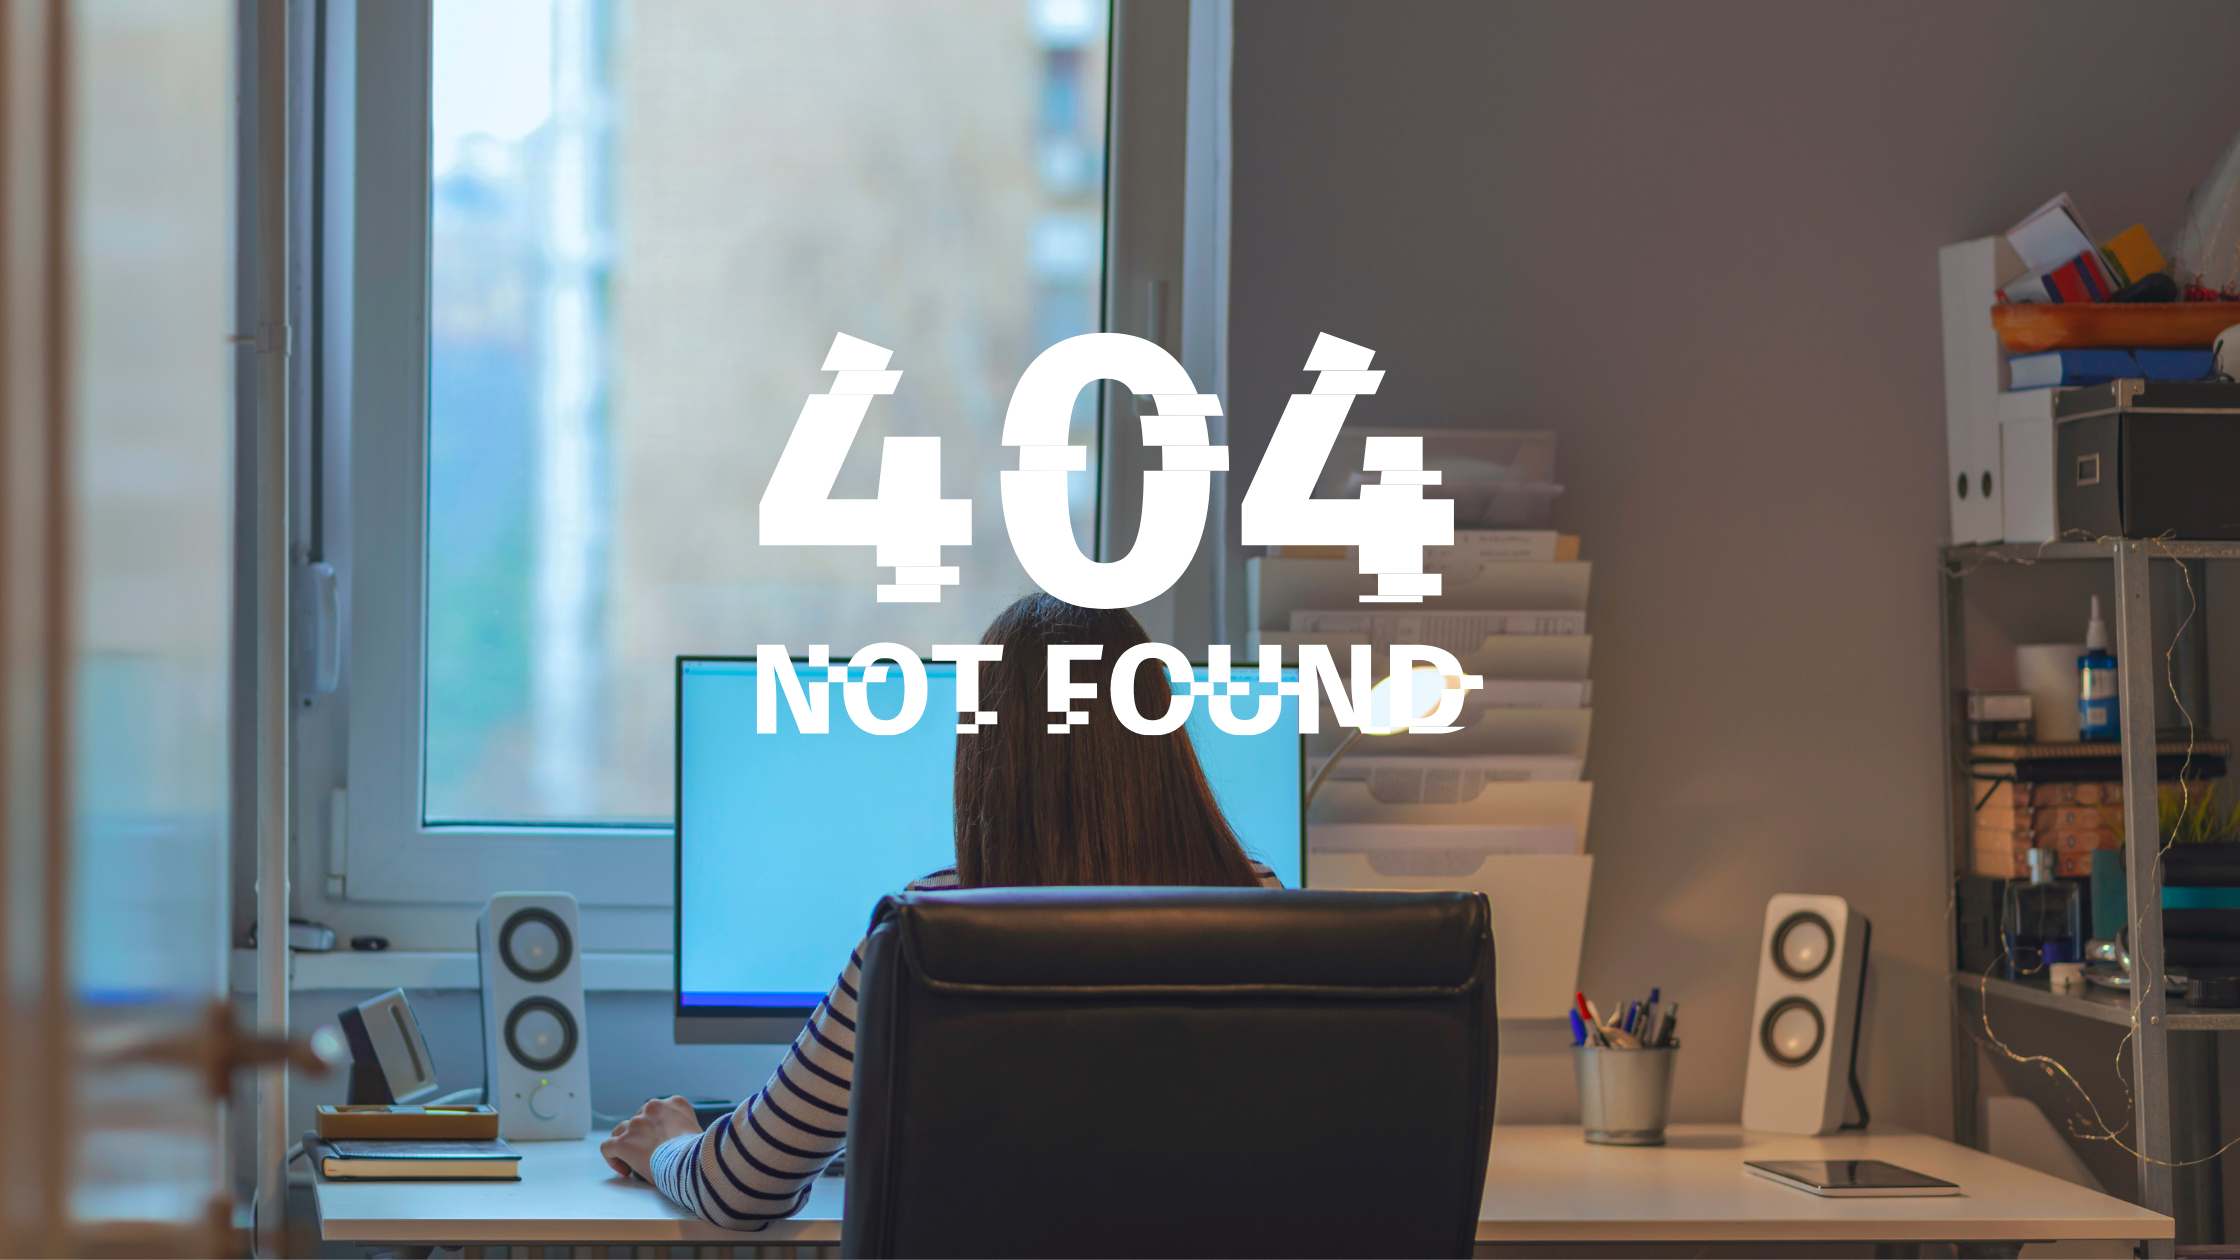 Woman-searching-candidates-and-message-error-404-not-found